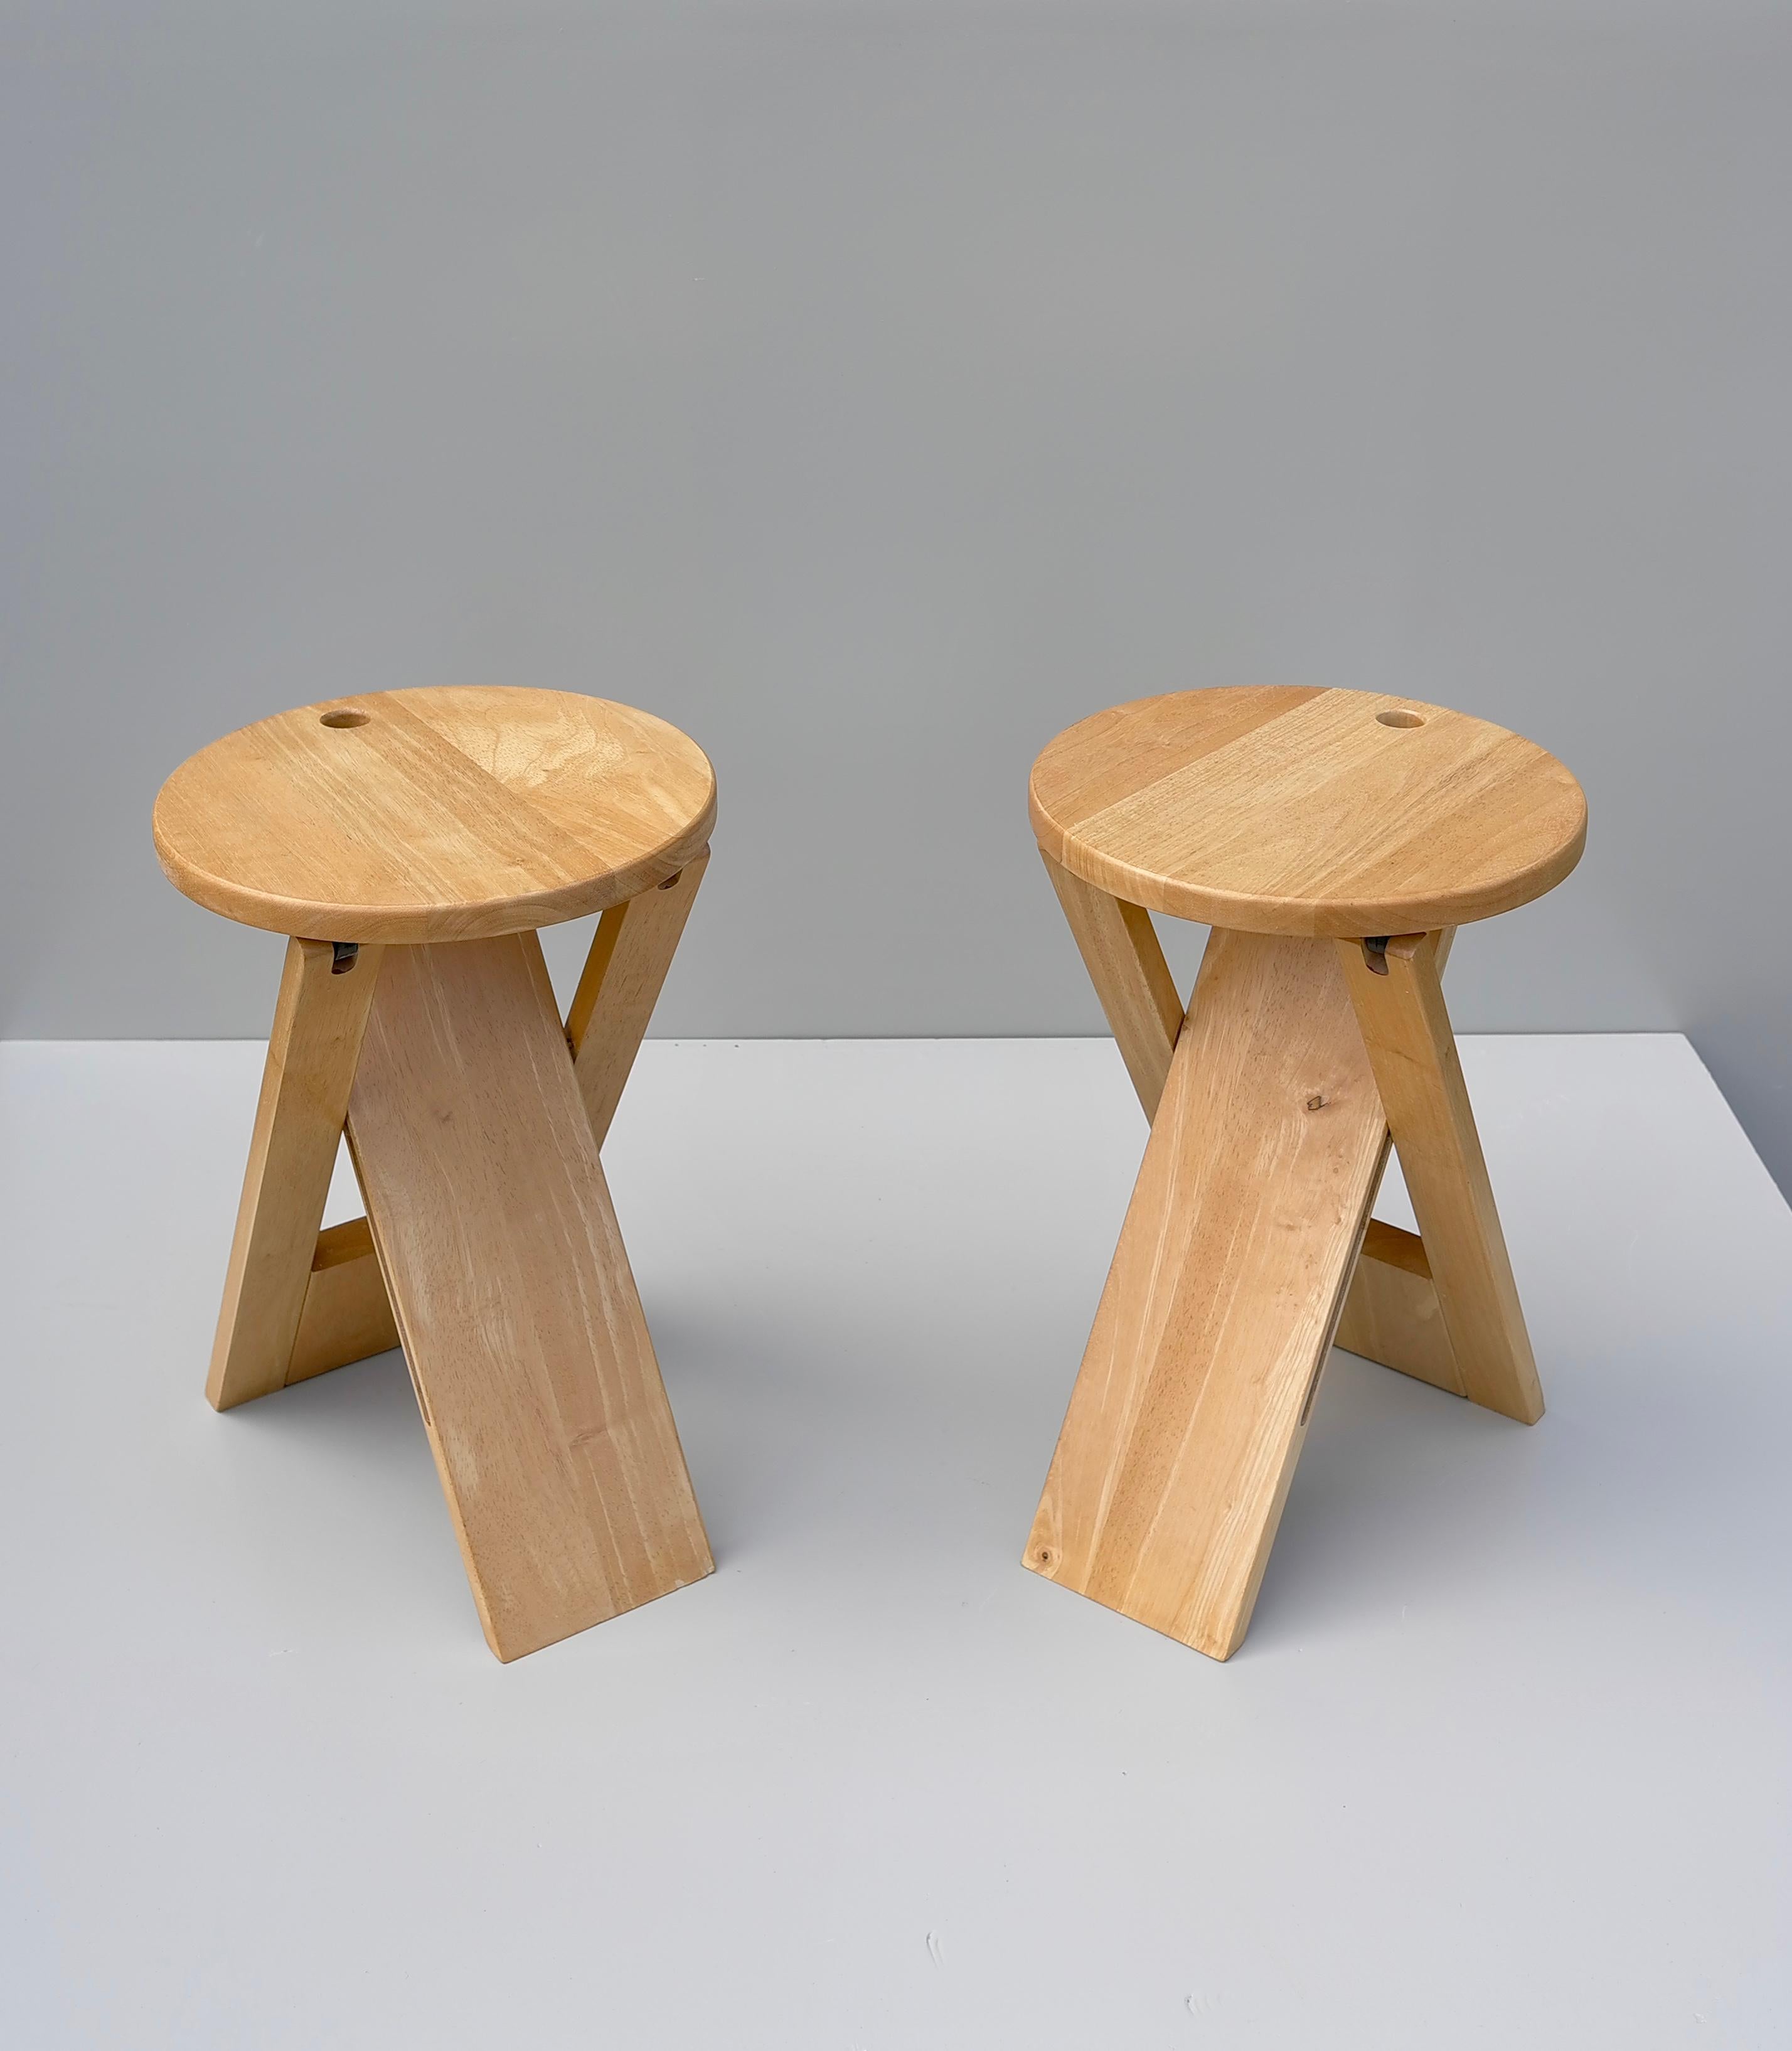 Late 20th Century Pair of Roger Tallon Ts Foldable Stools for Sentou, Mid-Century France 1970’s For Sale